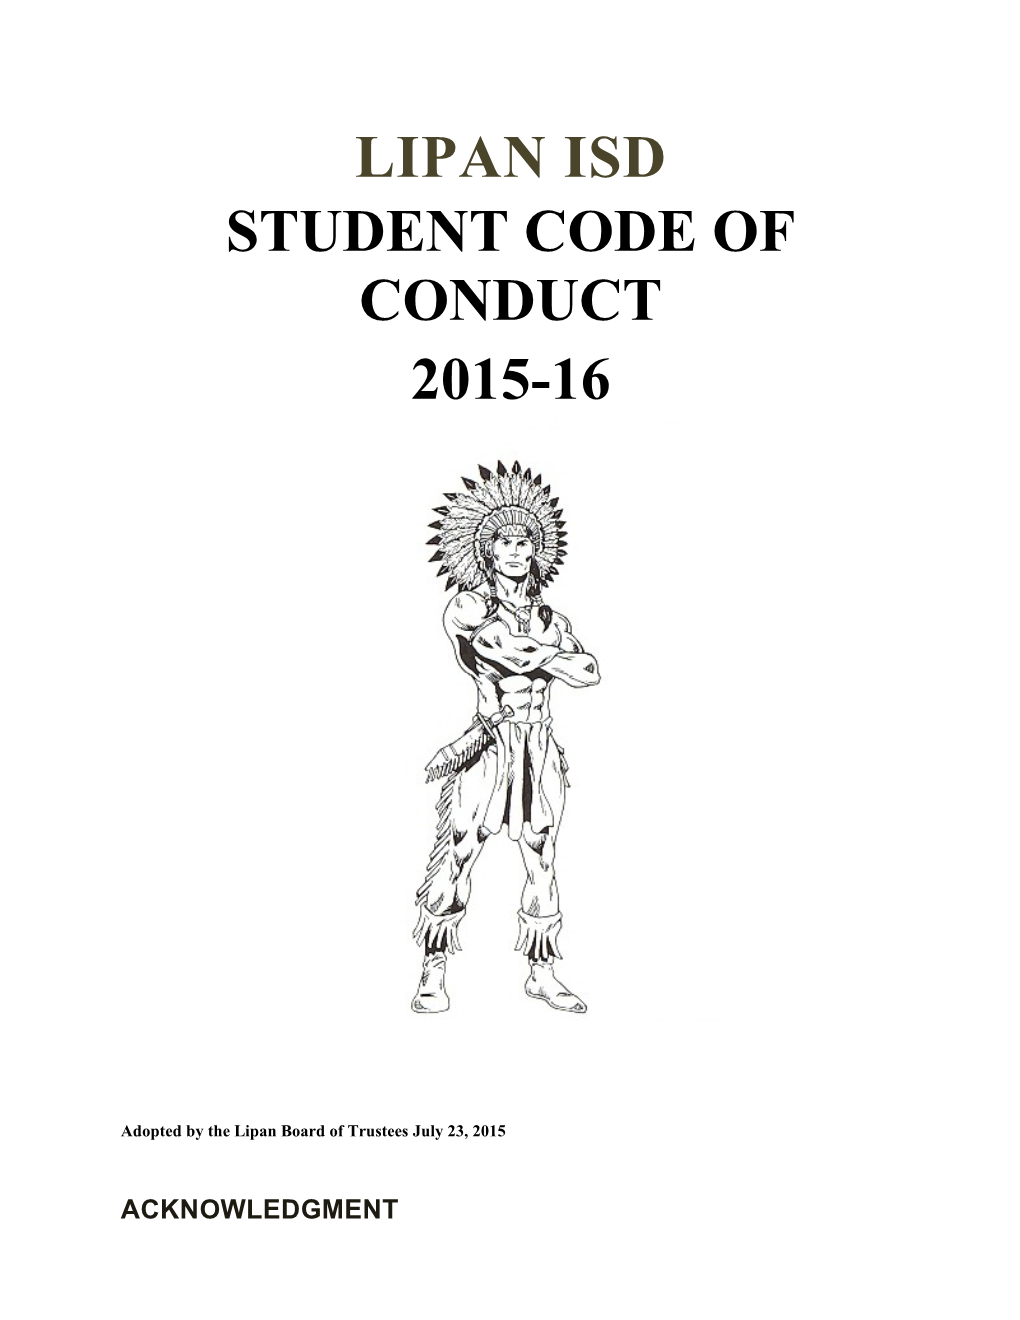 Student Code of Conduct s4